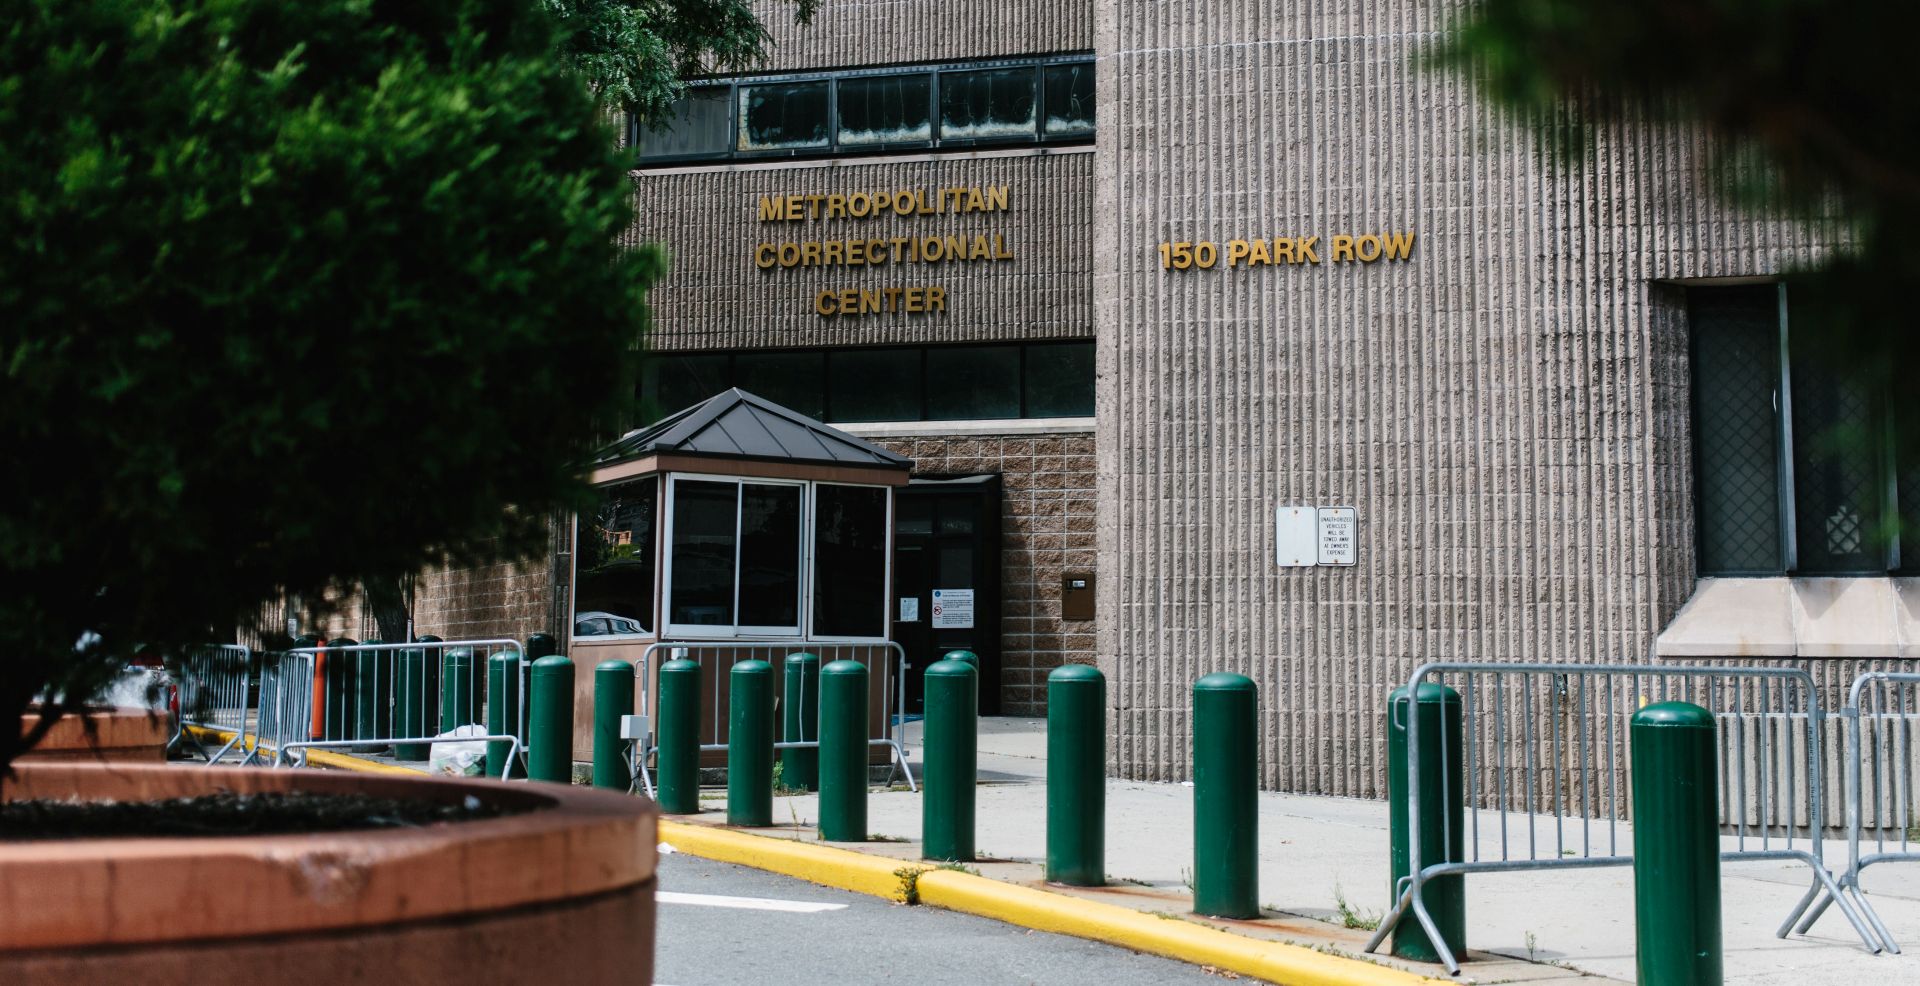 epa07766856 External view of the Manhattan Correctional Center where the US financier Jeffrey Epstein was found dead in New York, USA, 10 August 2019. According to media reports, Epstein was found dead in his prison cell on 10 August 2019 morning in the MCC Manhattan while awaiting trial on sex trafficking charges. An official confirmation by authorities of his death is pending.  EPA/ALBA VIGARAY